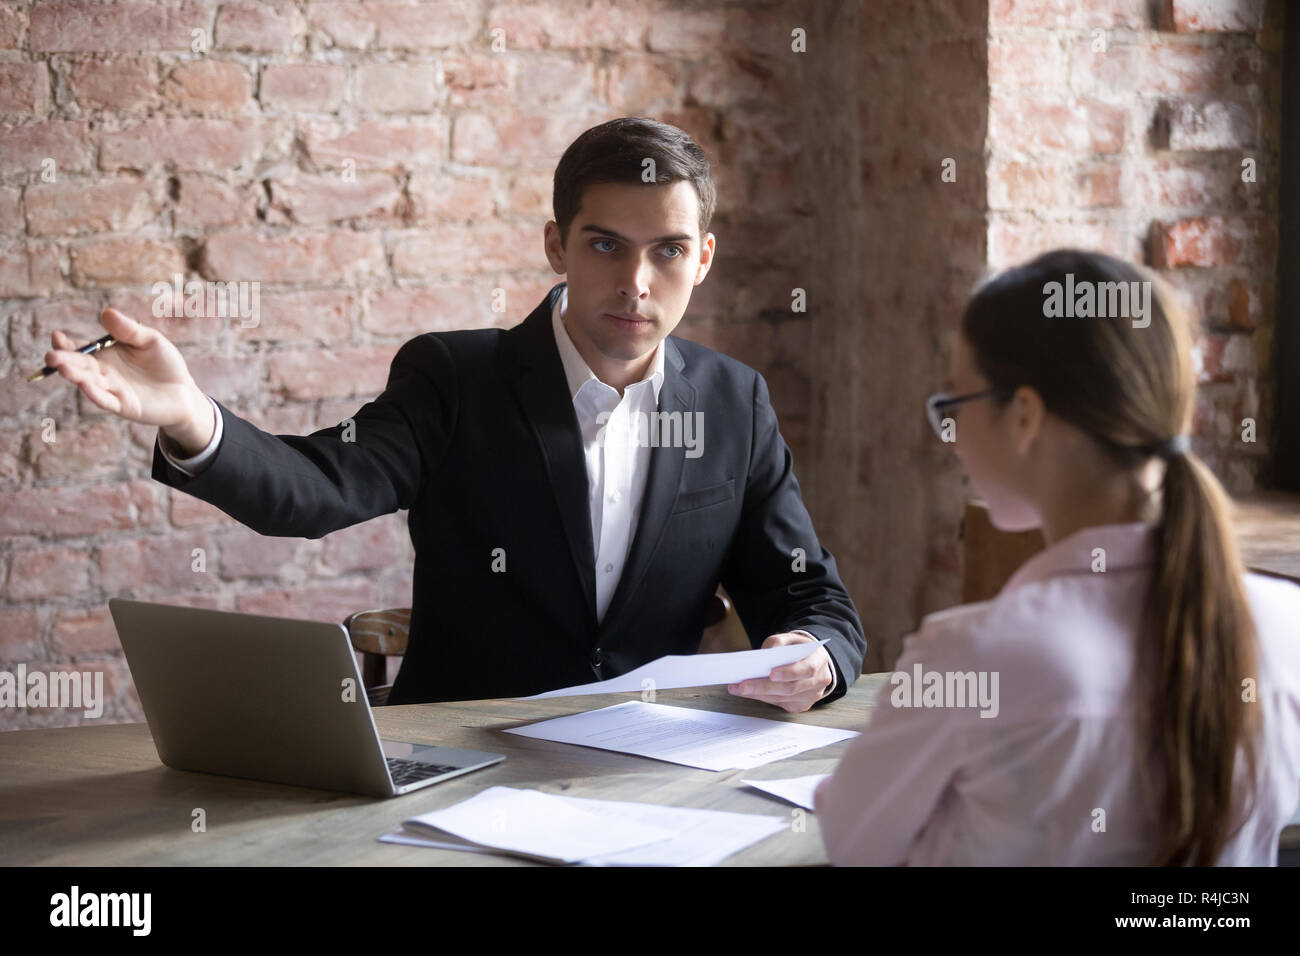 Annoyed boss points employee at door because of document error. Stock Photo